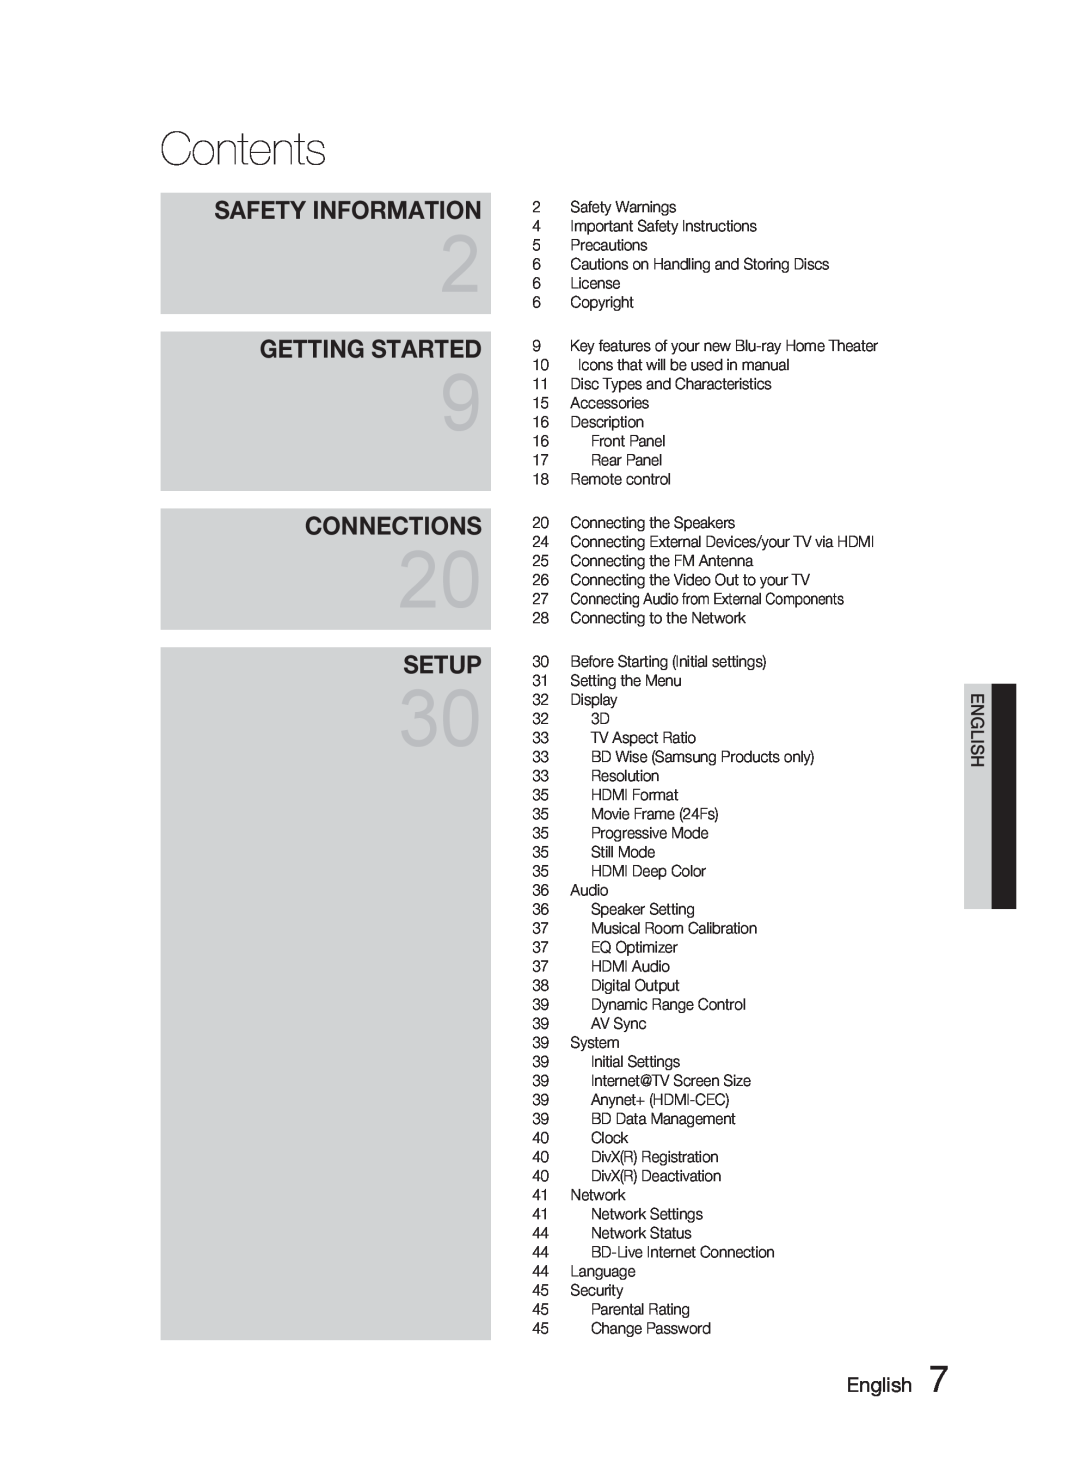 Samsung AH68-02279R user manual Contents, Getting Started, Connections, Setup, Safety Information, English 